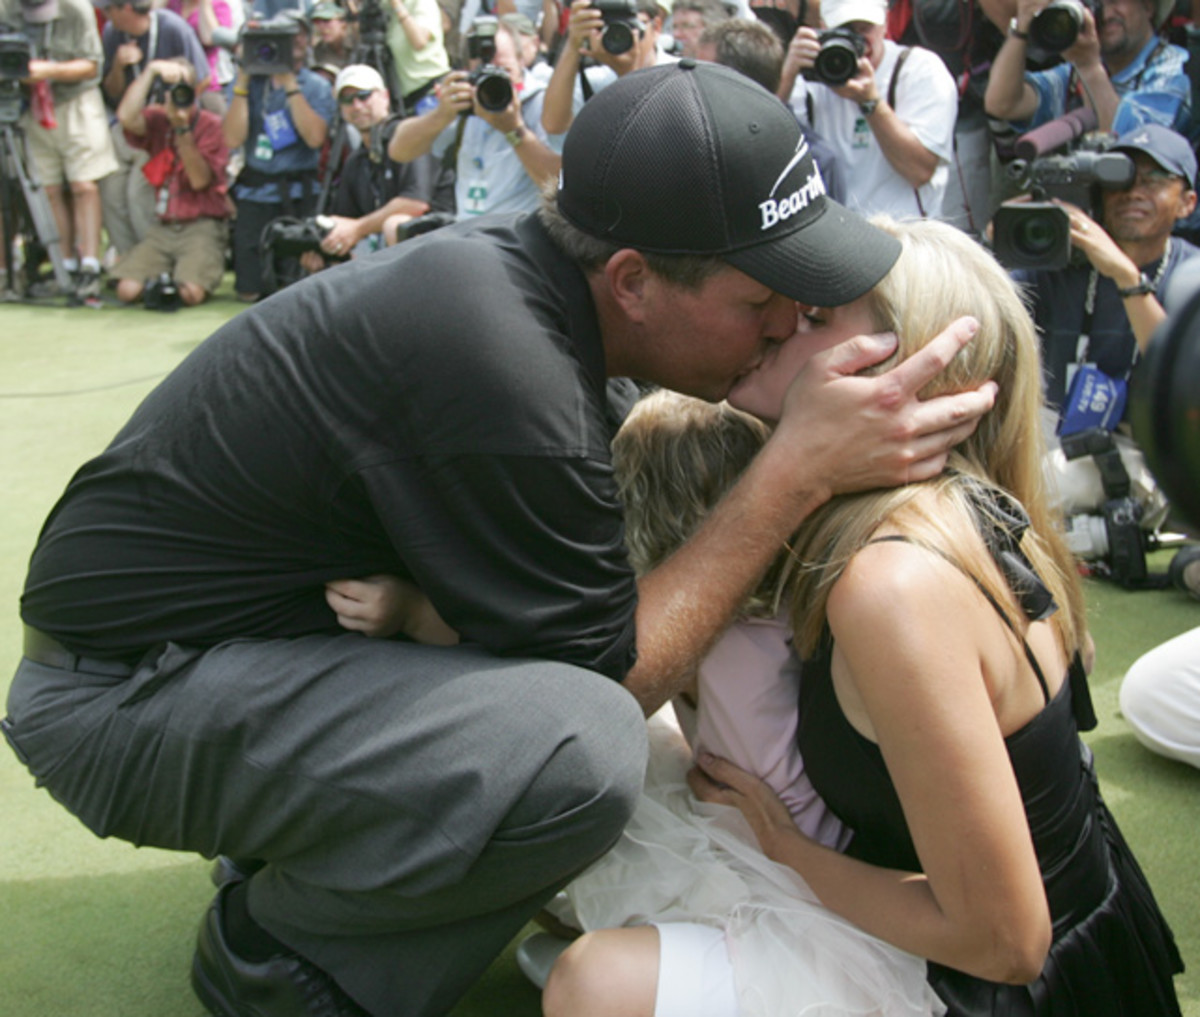 Phil and Amy Mickelson